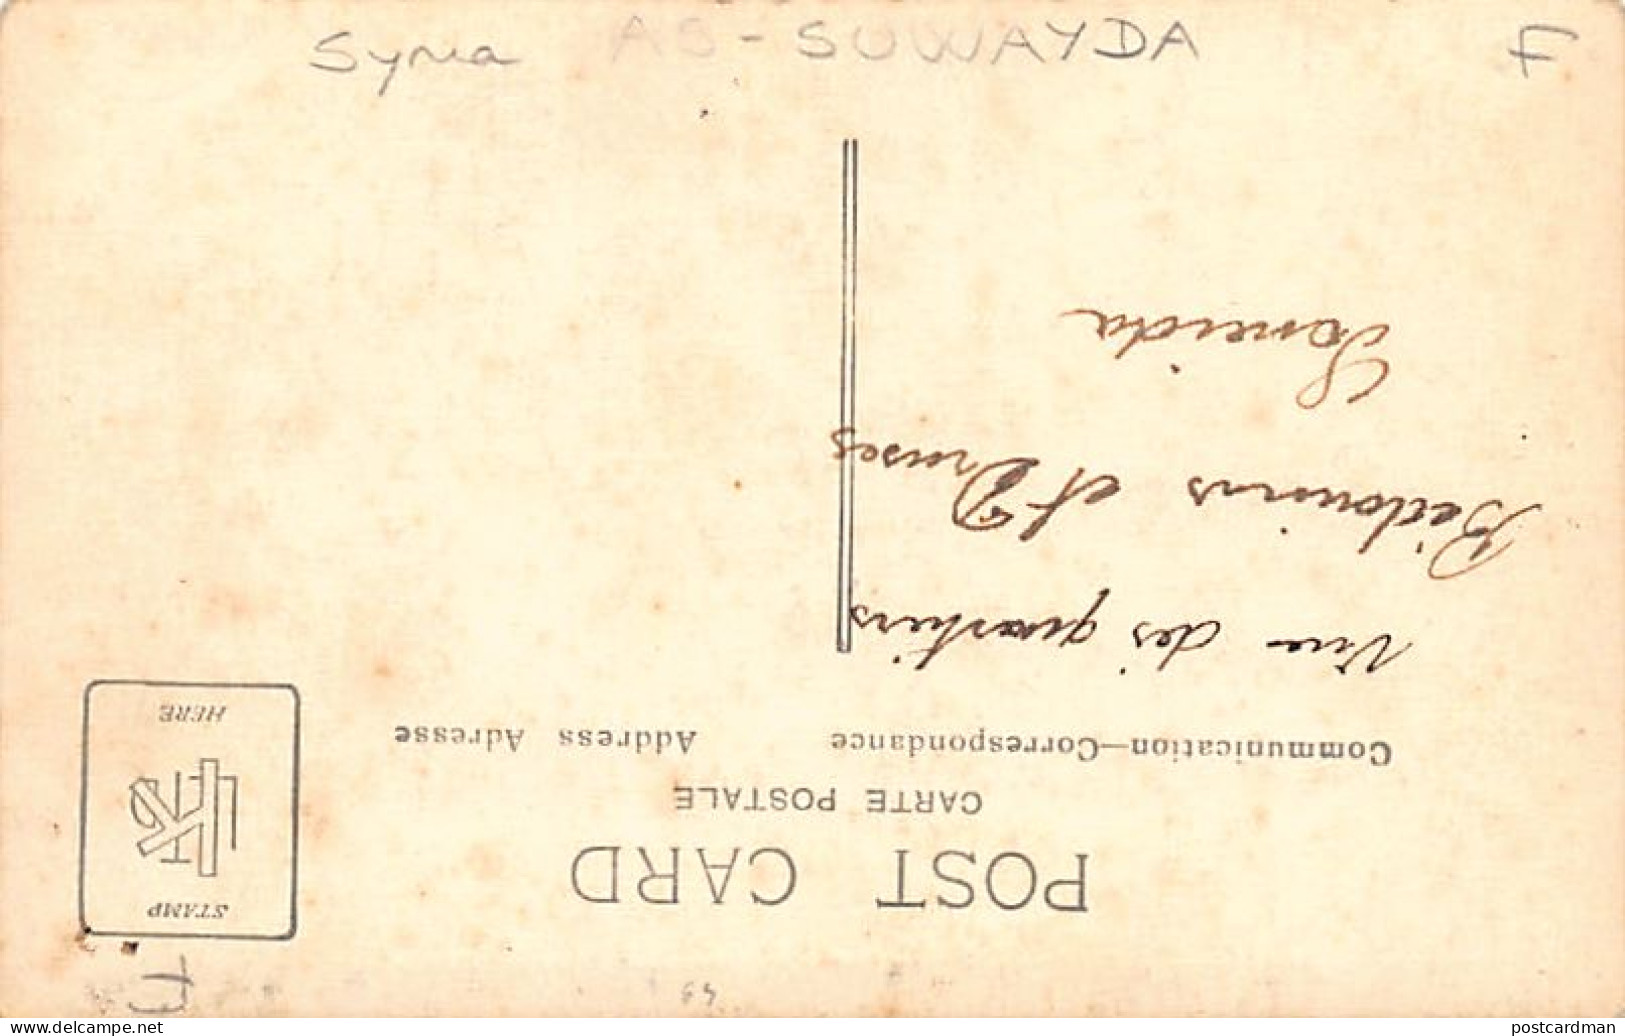 Syria - DAMASCUS - Litho Postcard - Publ. A. Piltz - SEE STAMP AND POSTMARK. - Syria